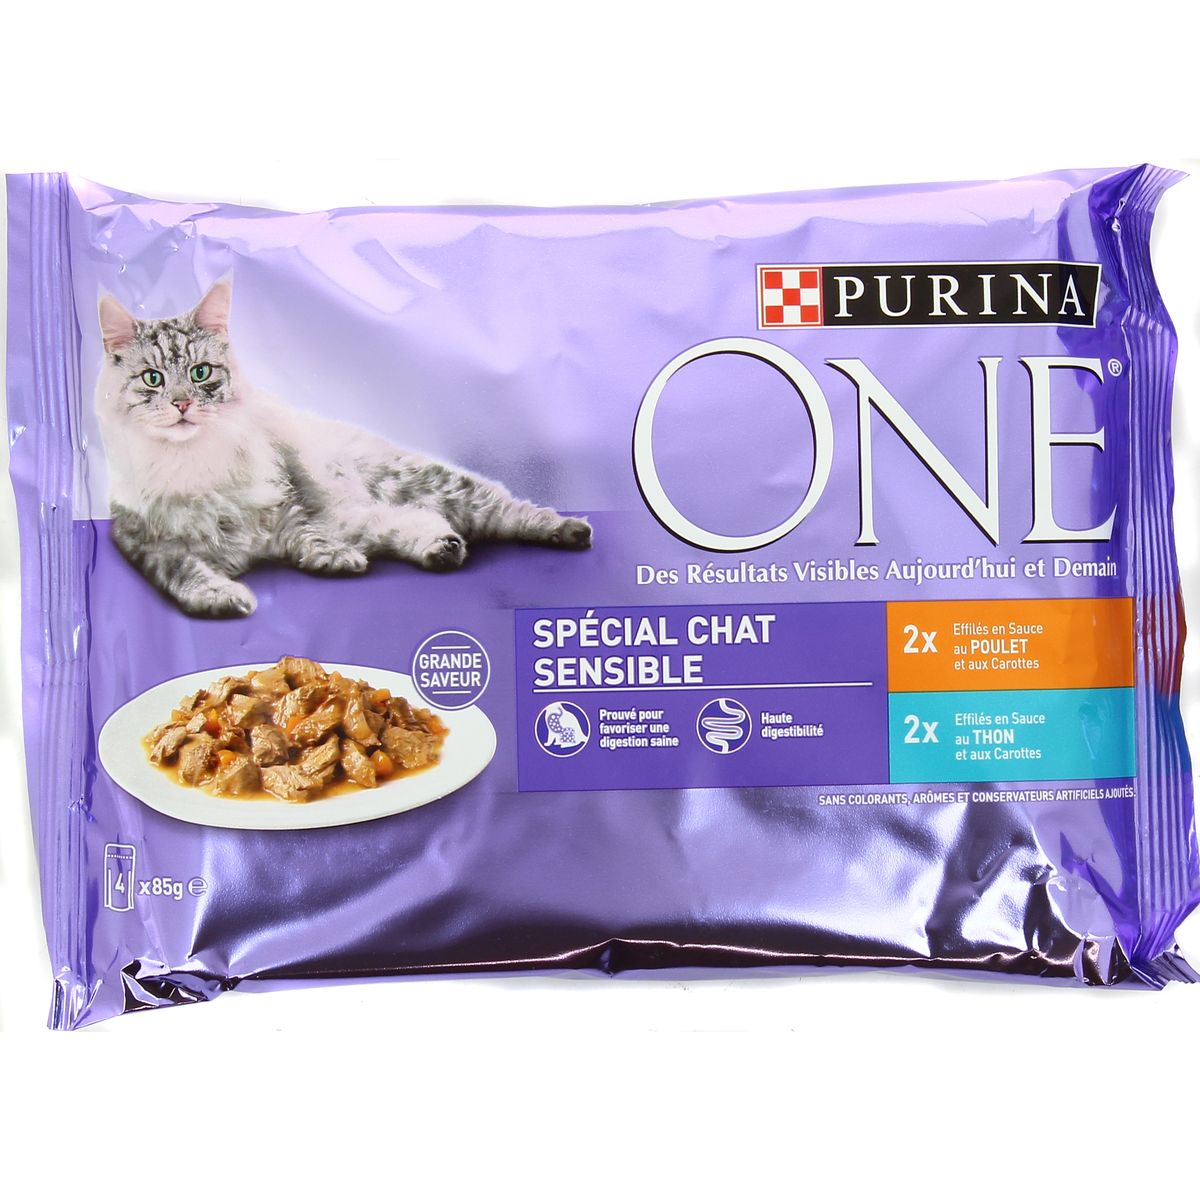 Achat Vente Purina One Effiles En Sauce Special Chat Sensible 4x85g